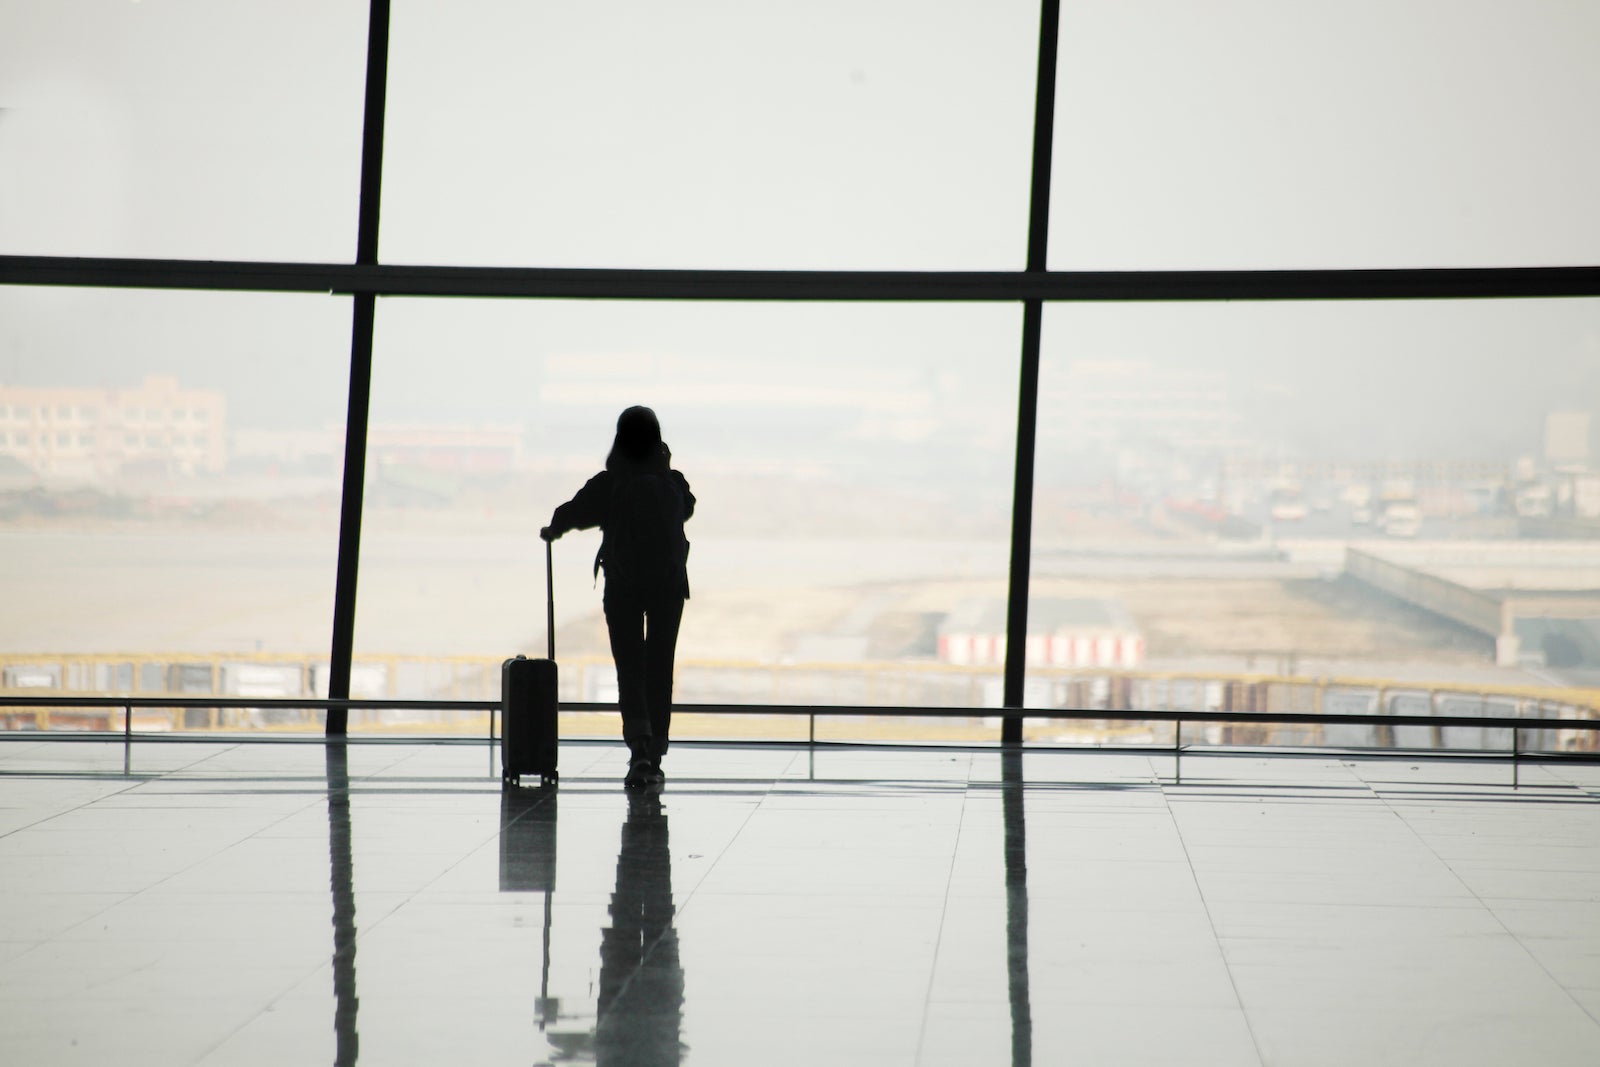 Silhouette of woman at airport window